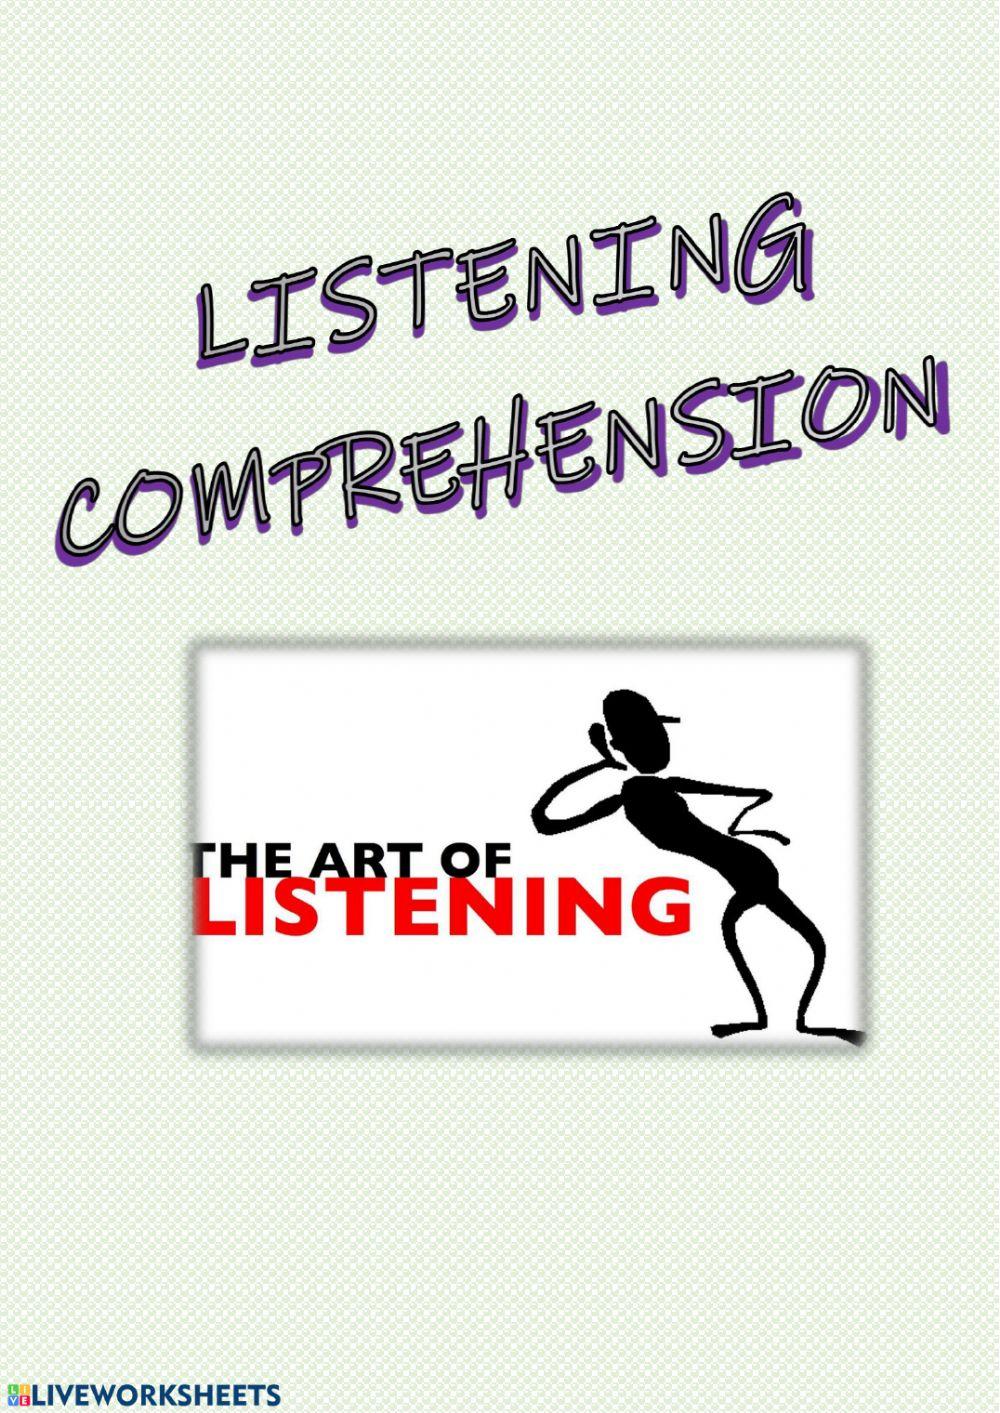 Listening comprehension cover